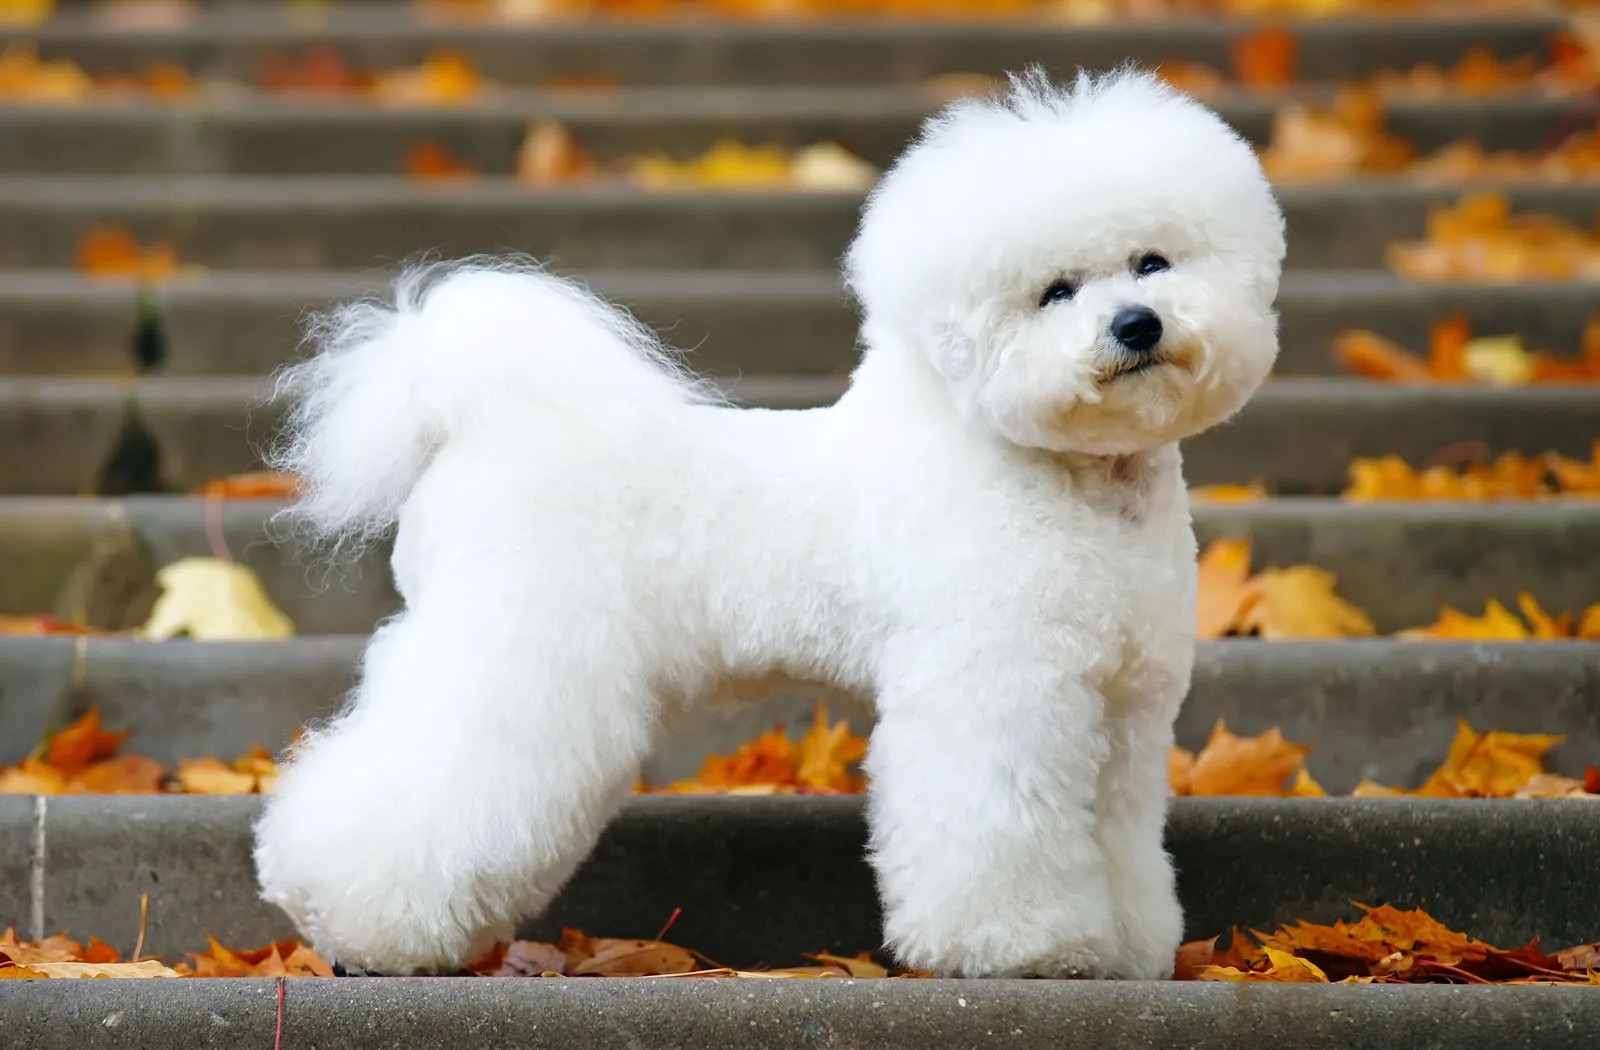 Can You Identify These 20 Dog Breeds 🐕 from Just One Picture? Bichon Frise